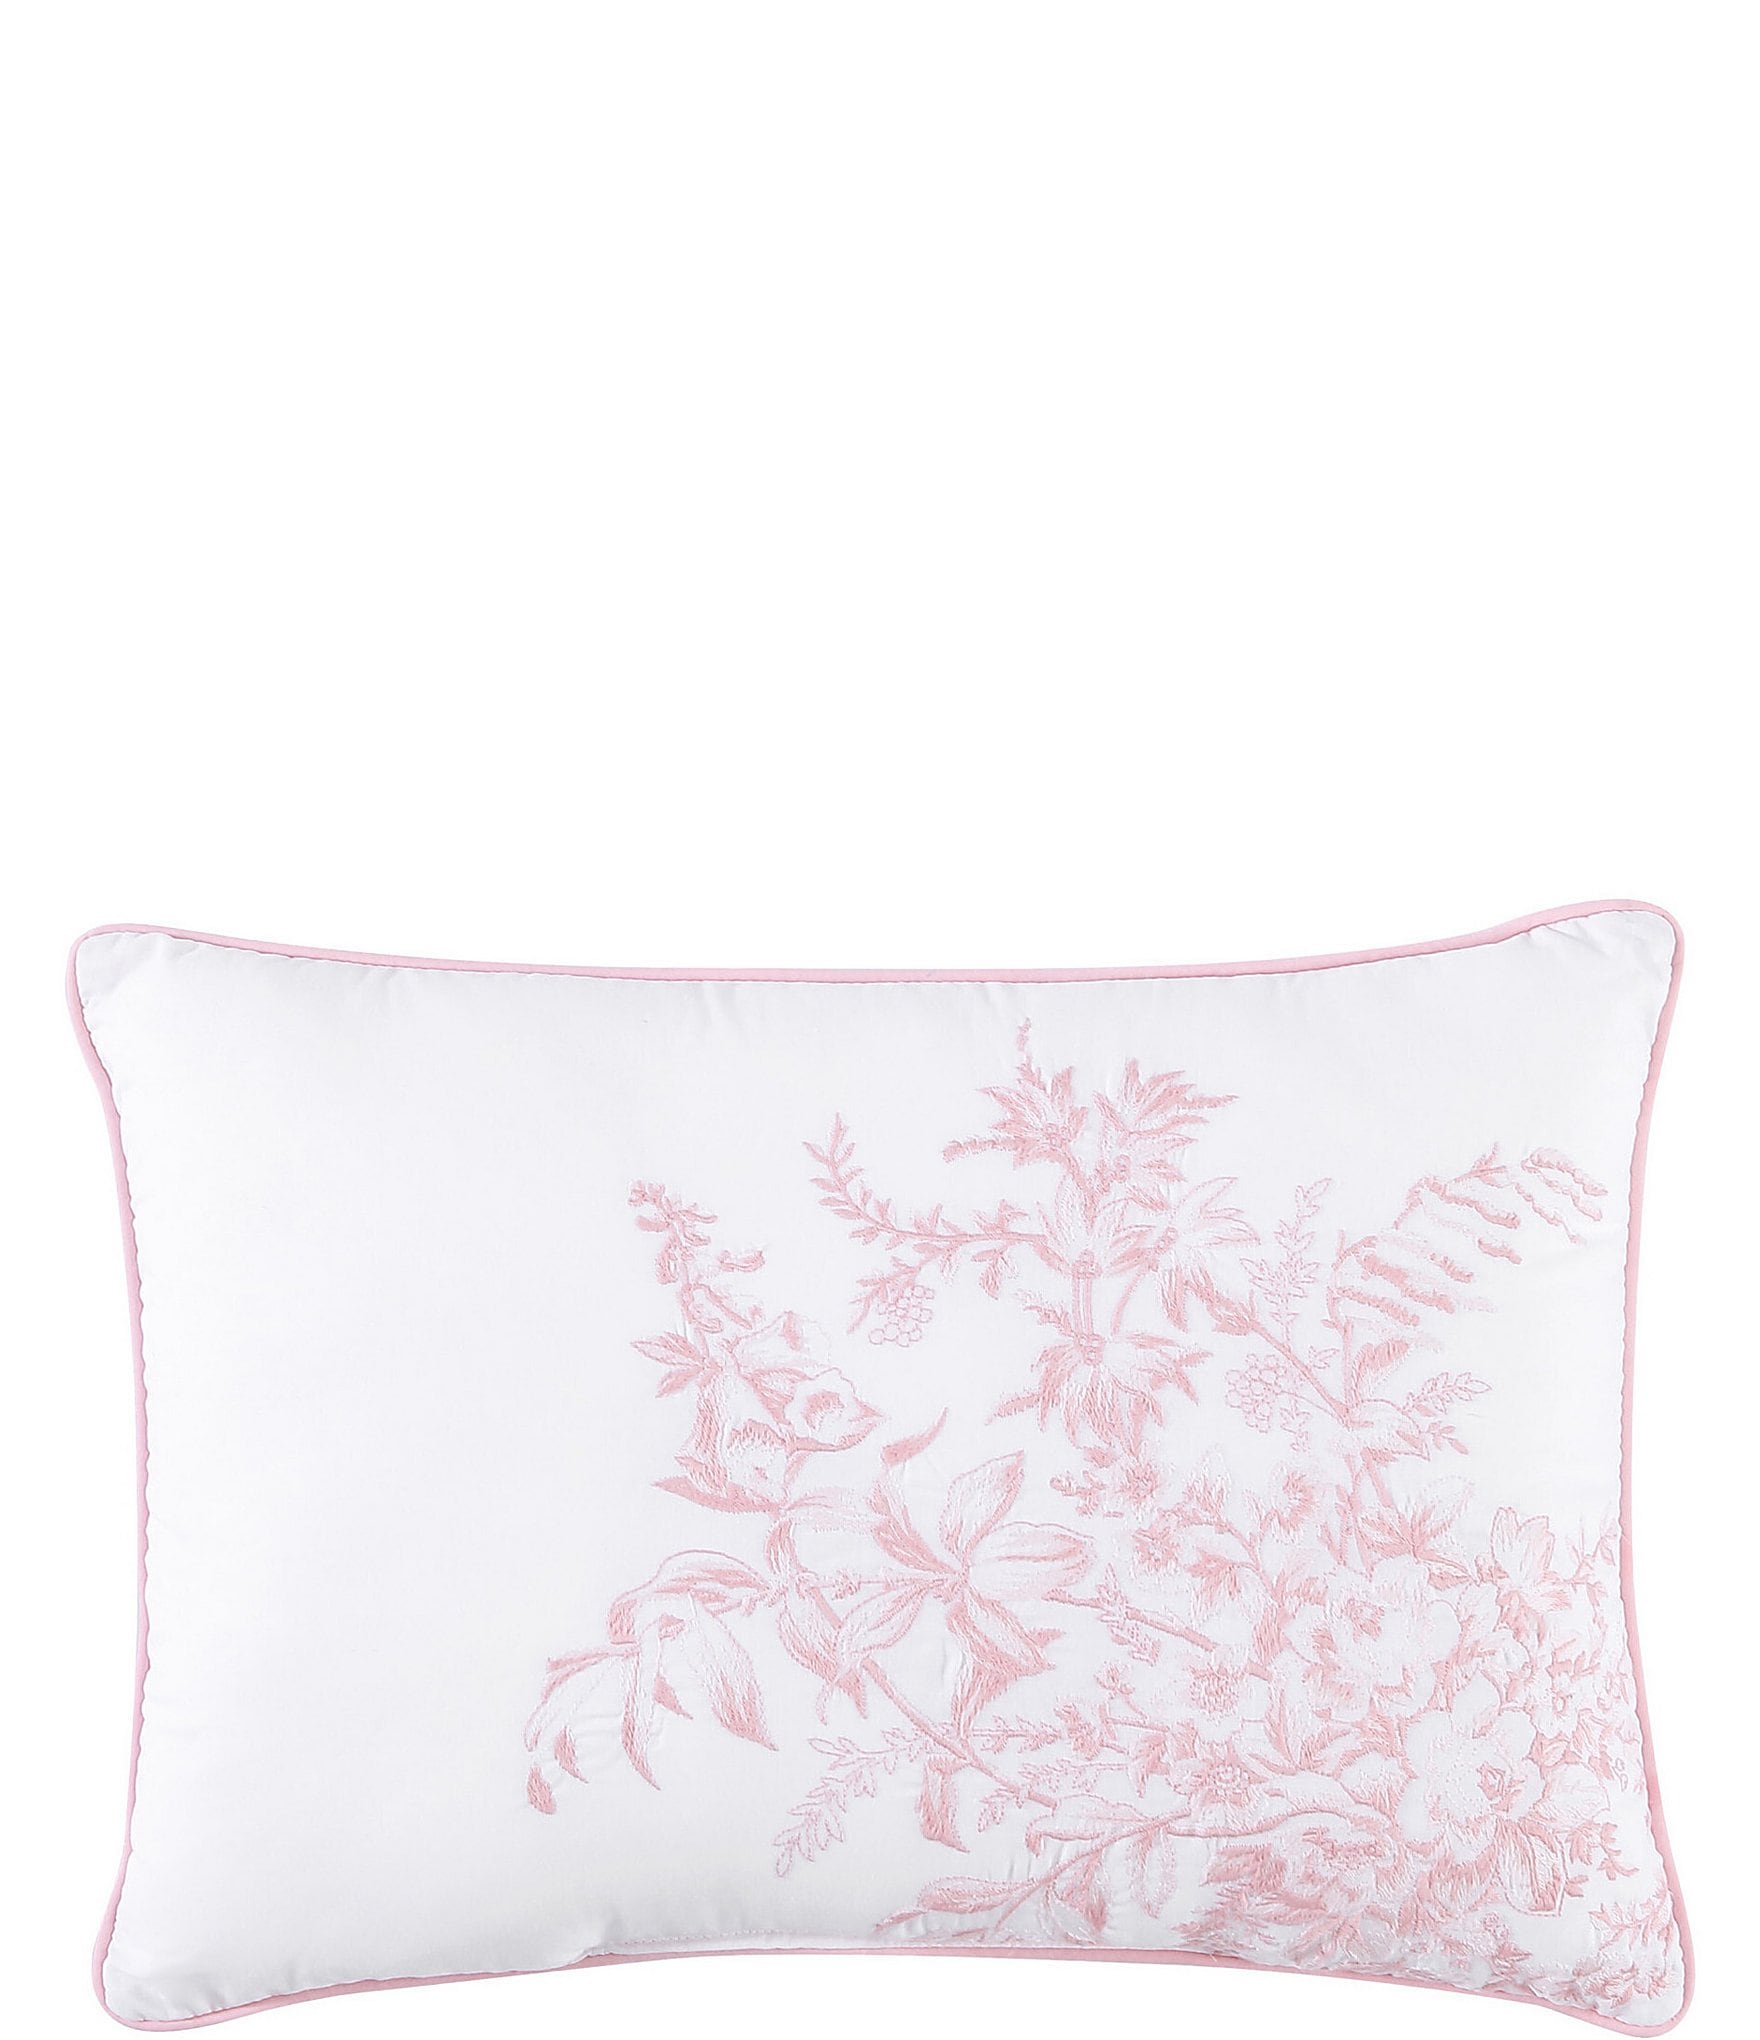 https://dimg.dillards.com/is/image/DillardsZoom/zoom/laura-ashley-bedford-embroidered-floral-cotton-breakfast-decorative-pillow/00000000_zi_cc9a324c-5a2d-4a97-9068-ab5fce5d1e3f.jpg